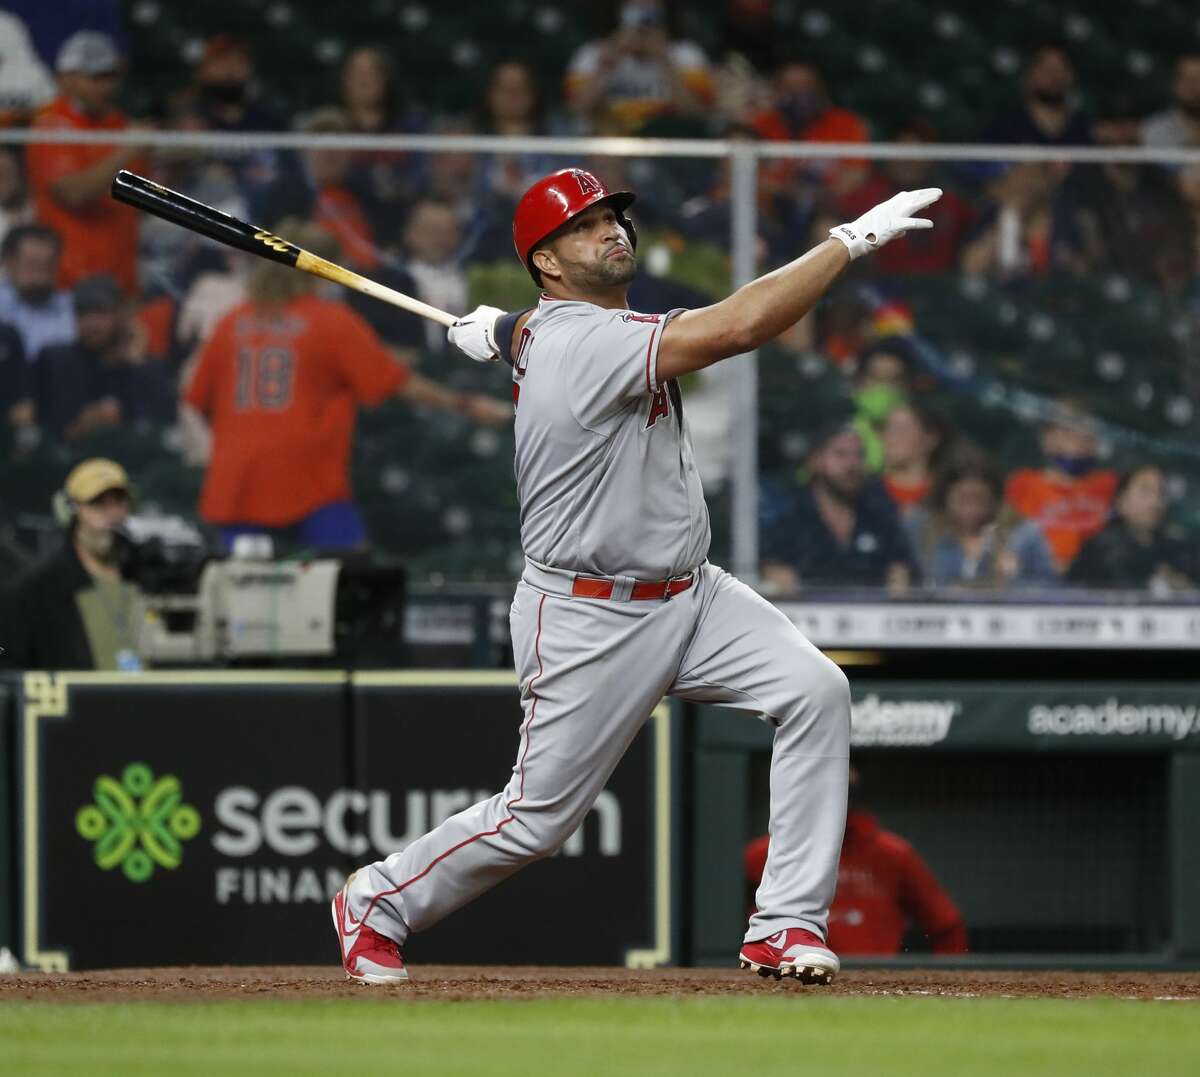 Albert Pujols, who's done a career's worth of damage to Astros pitching, is back with the Cardinals. Naturally, he made his St. Louis reappearance during Monday's exhibition against Houston.